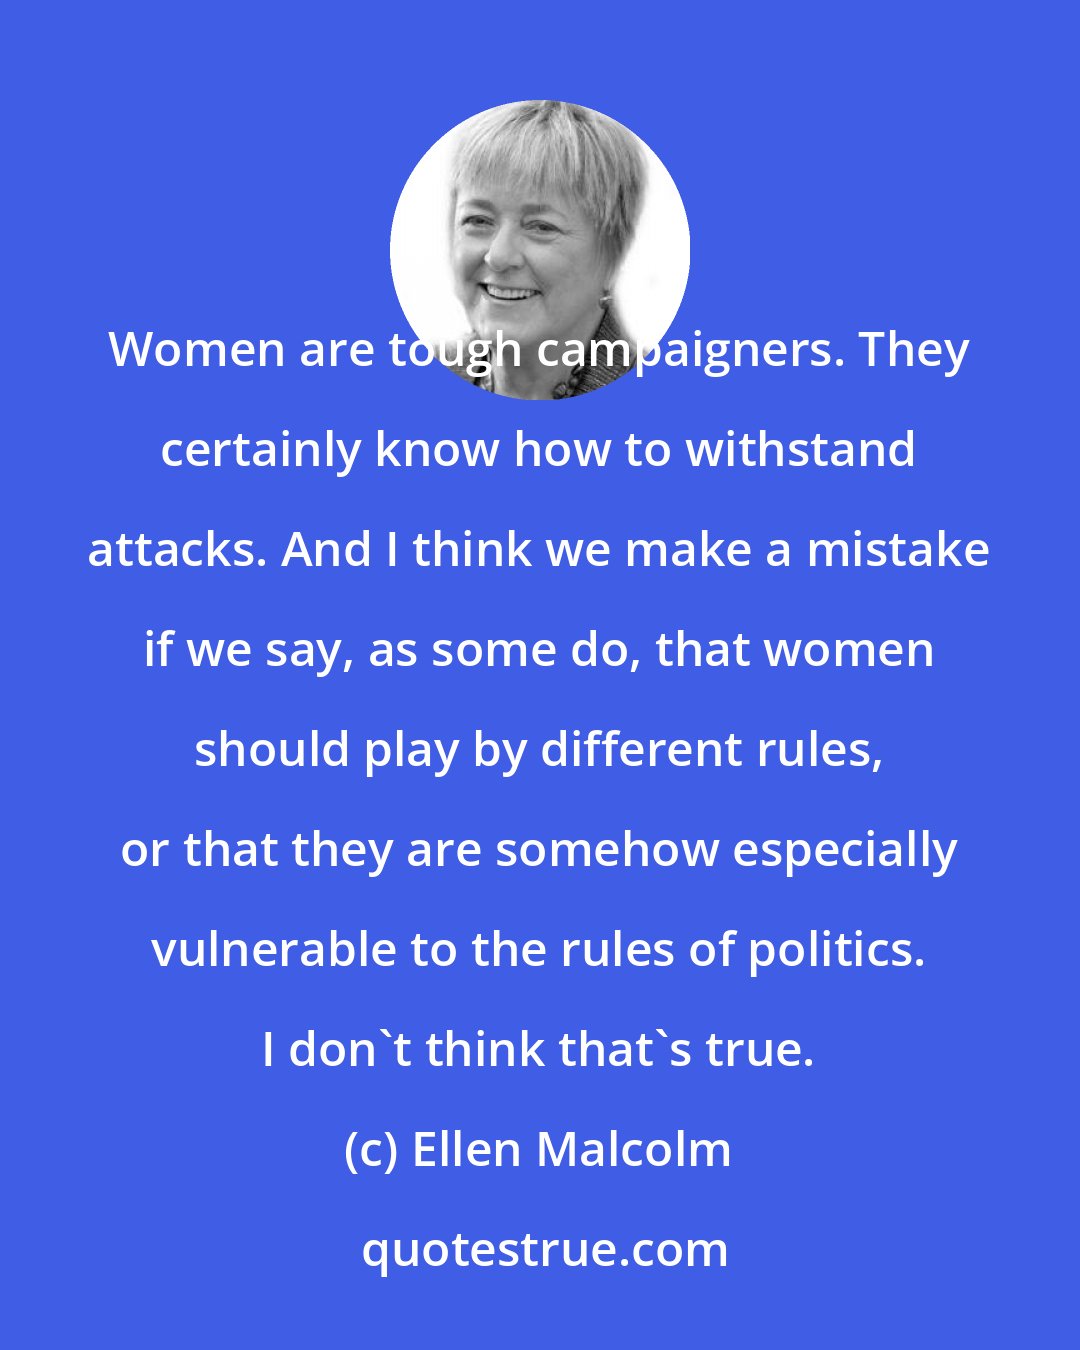 Ellen Malcolm: Women are tough campaigners. They certainly know how to withstand attacks. And I think we make a mistake if we say, as some do, that women should play by different rules, or that they are somehow especially vulnerable to the rules of politics. I don't think that's true.